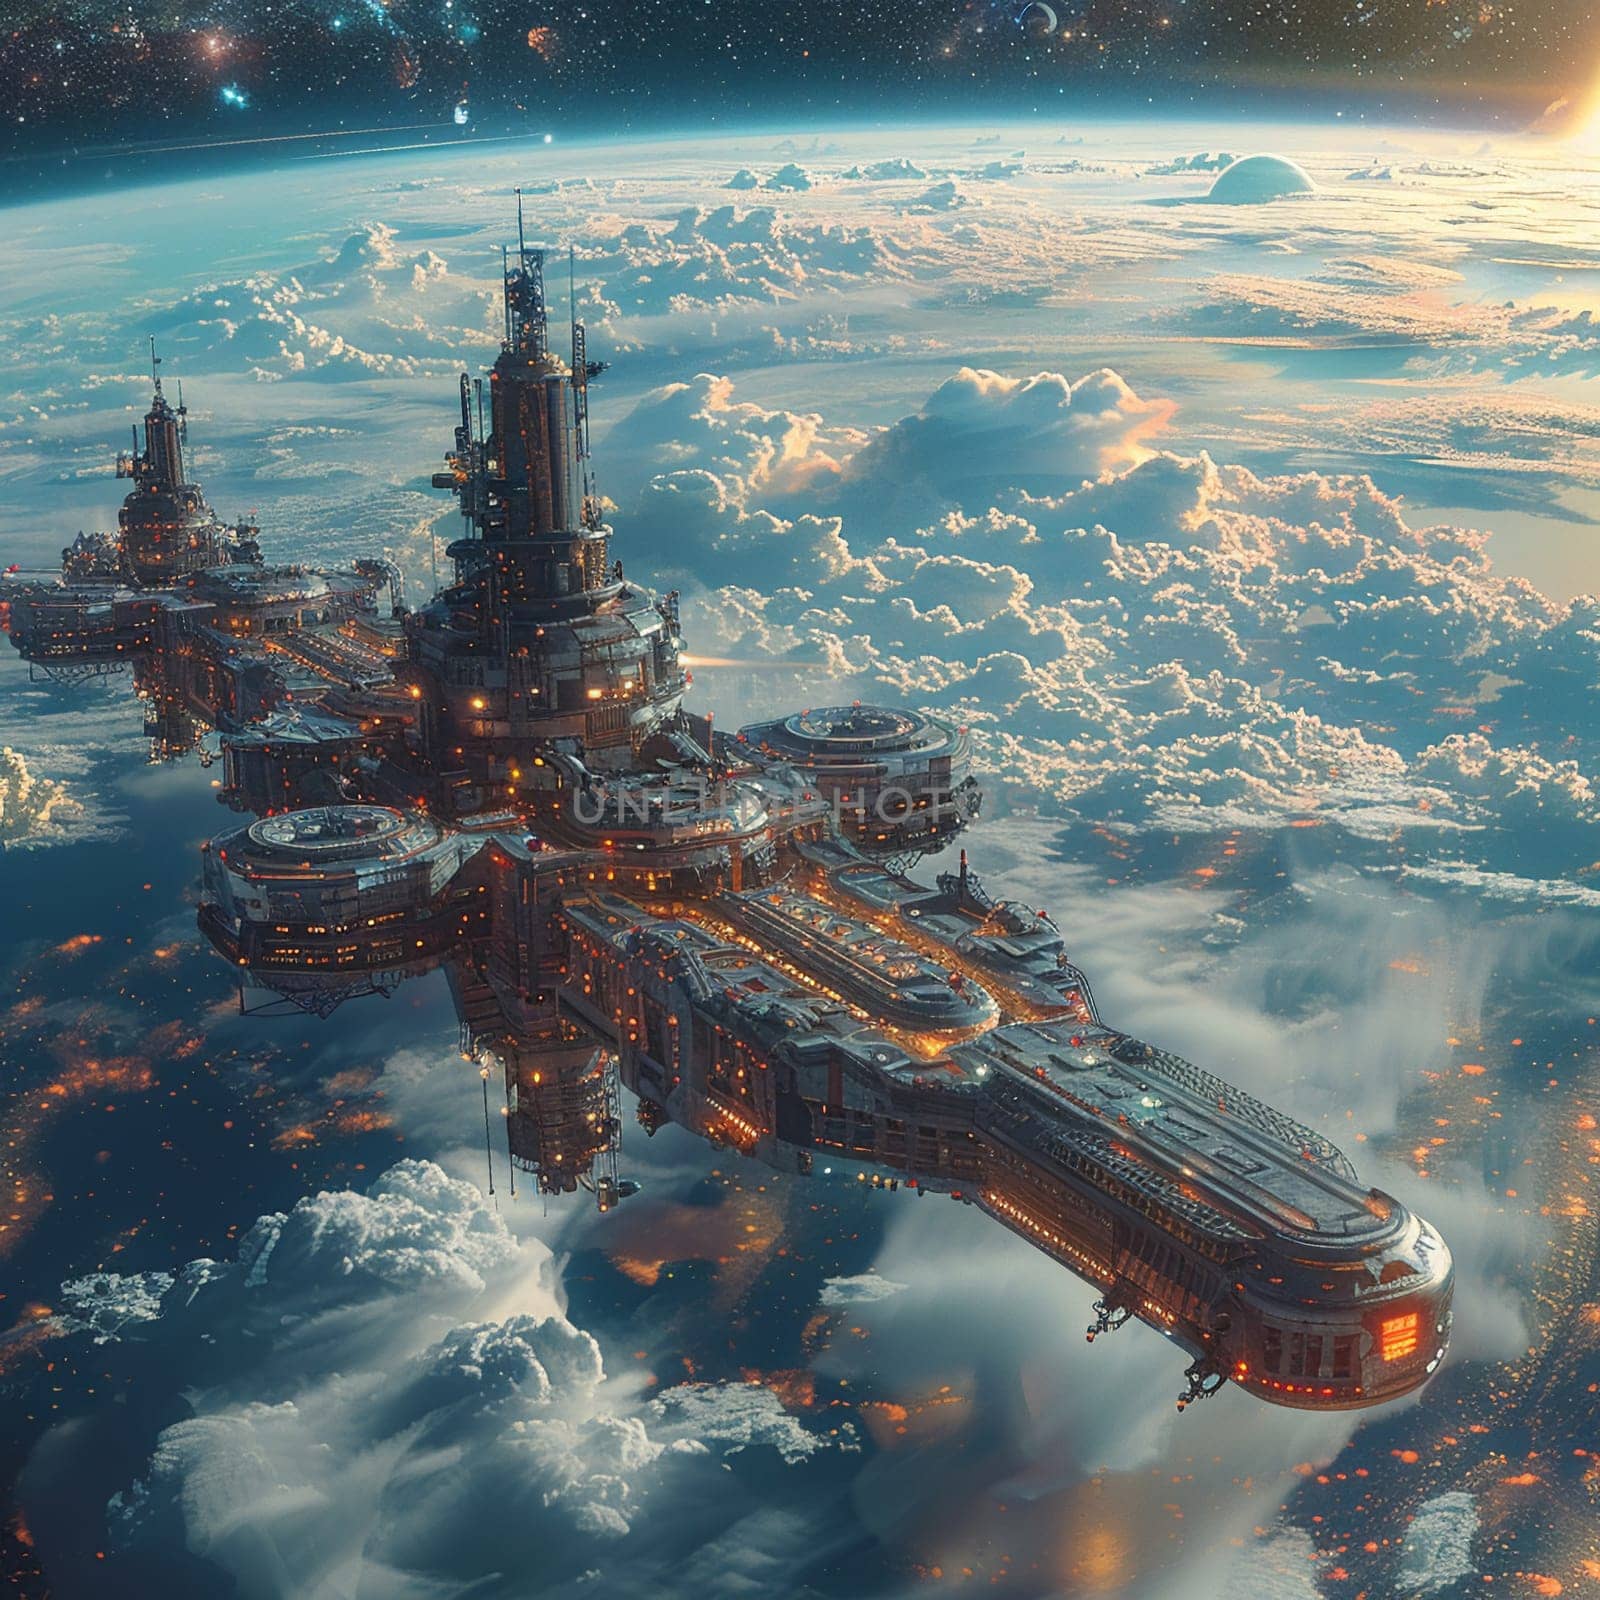 Space station orbiting a terraformed planet, rendered in stunning 3D with realistic textures.